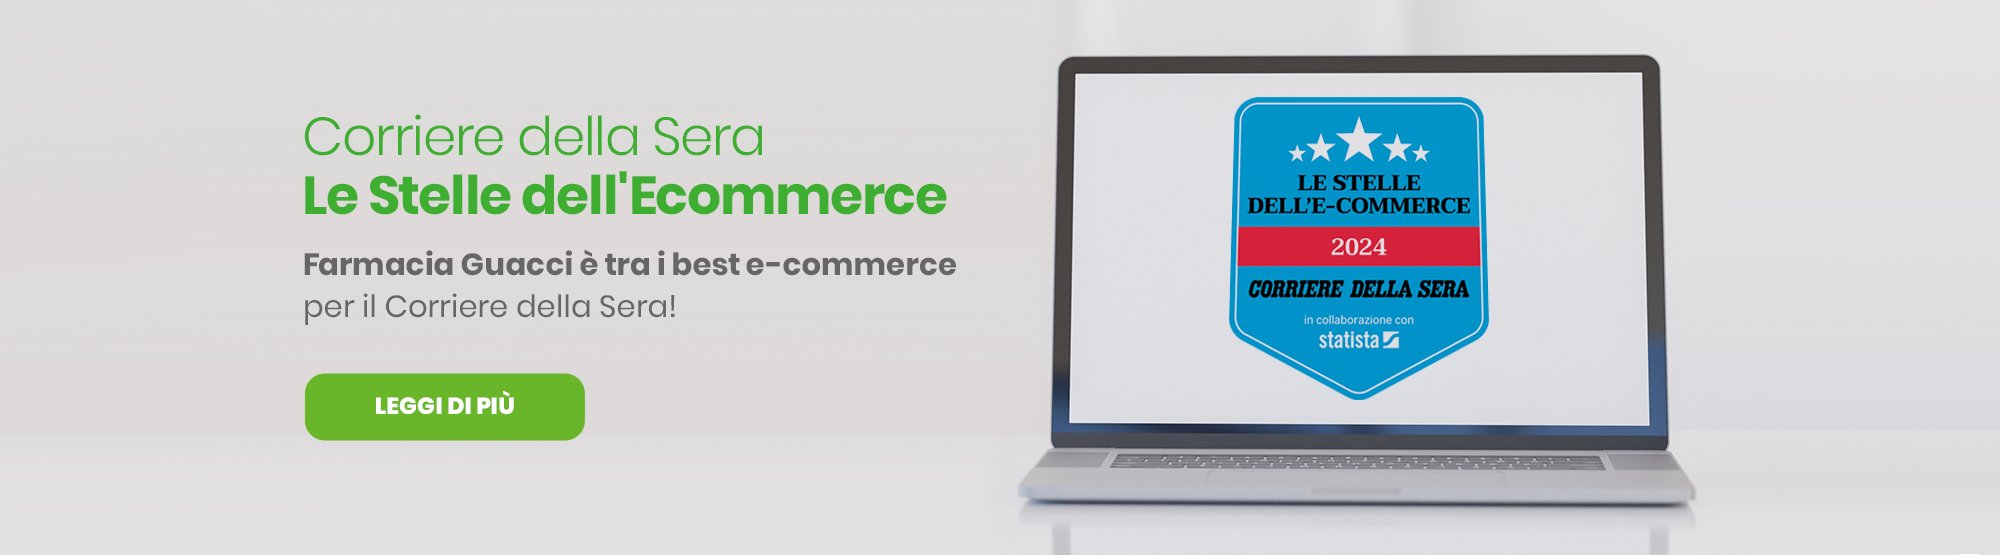 Le stelle dell'ecommerce